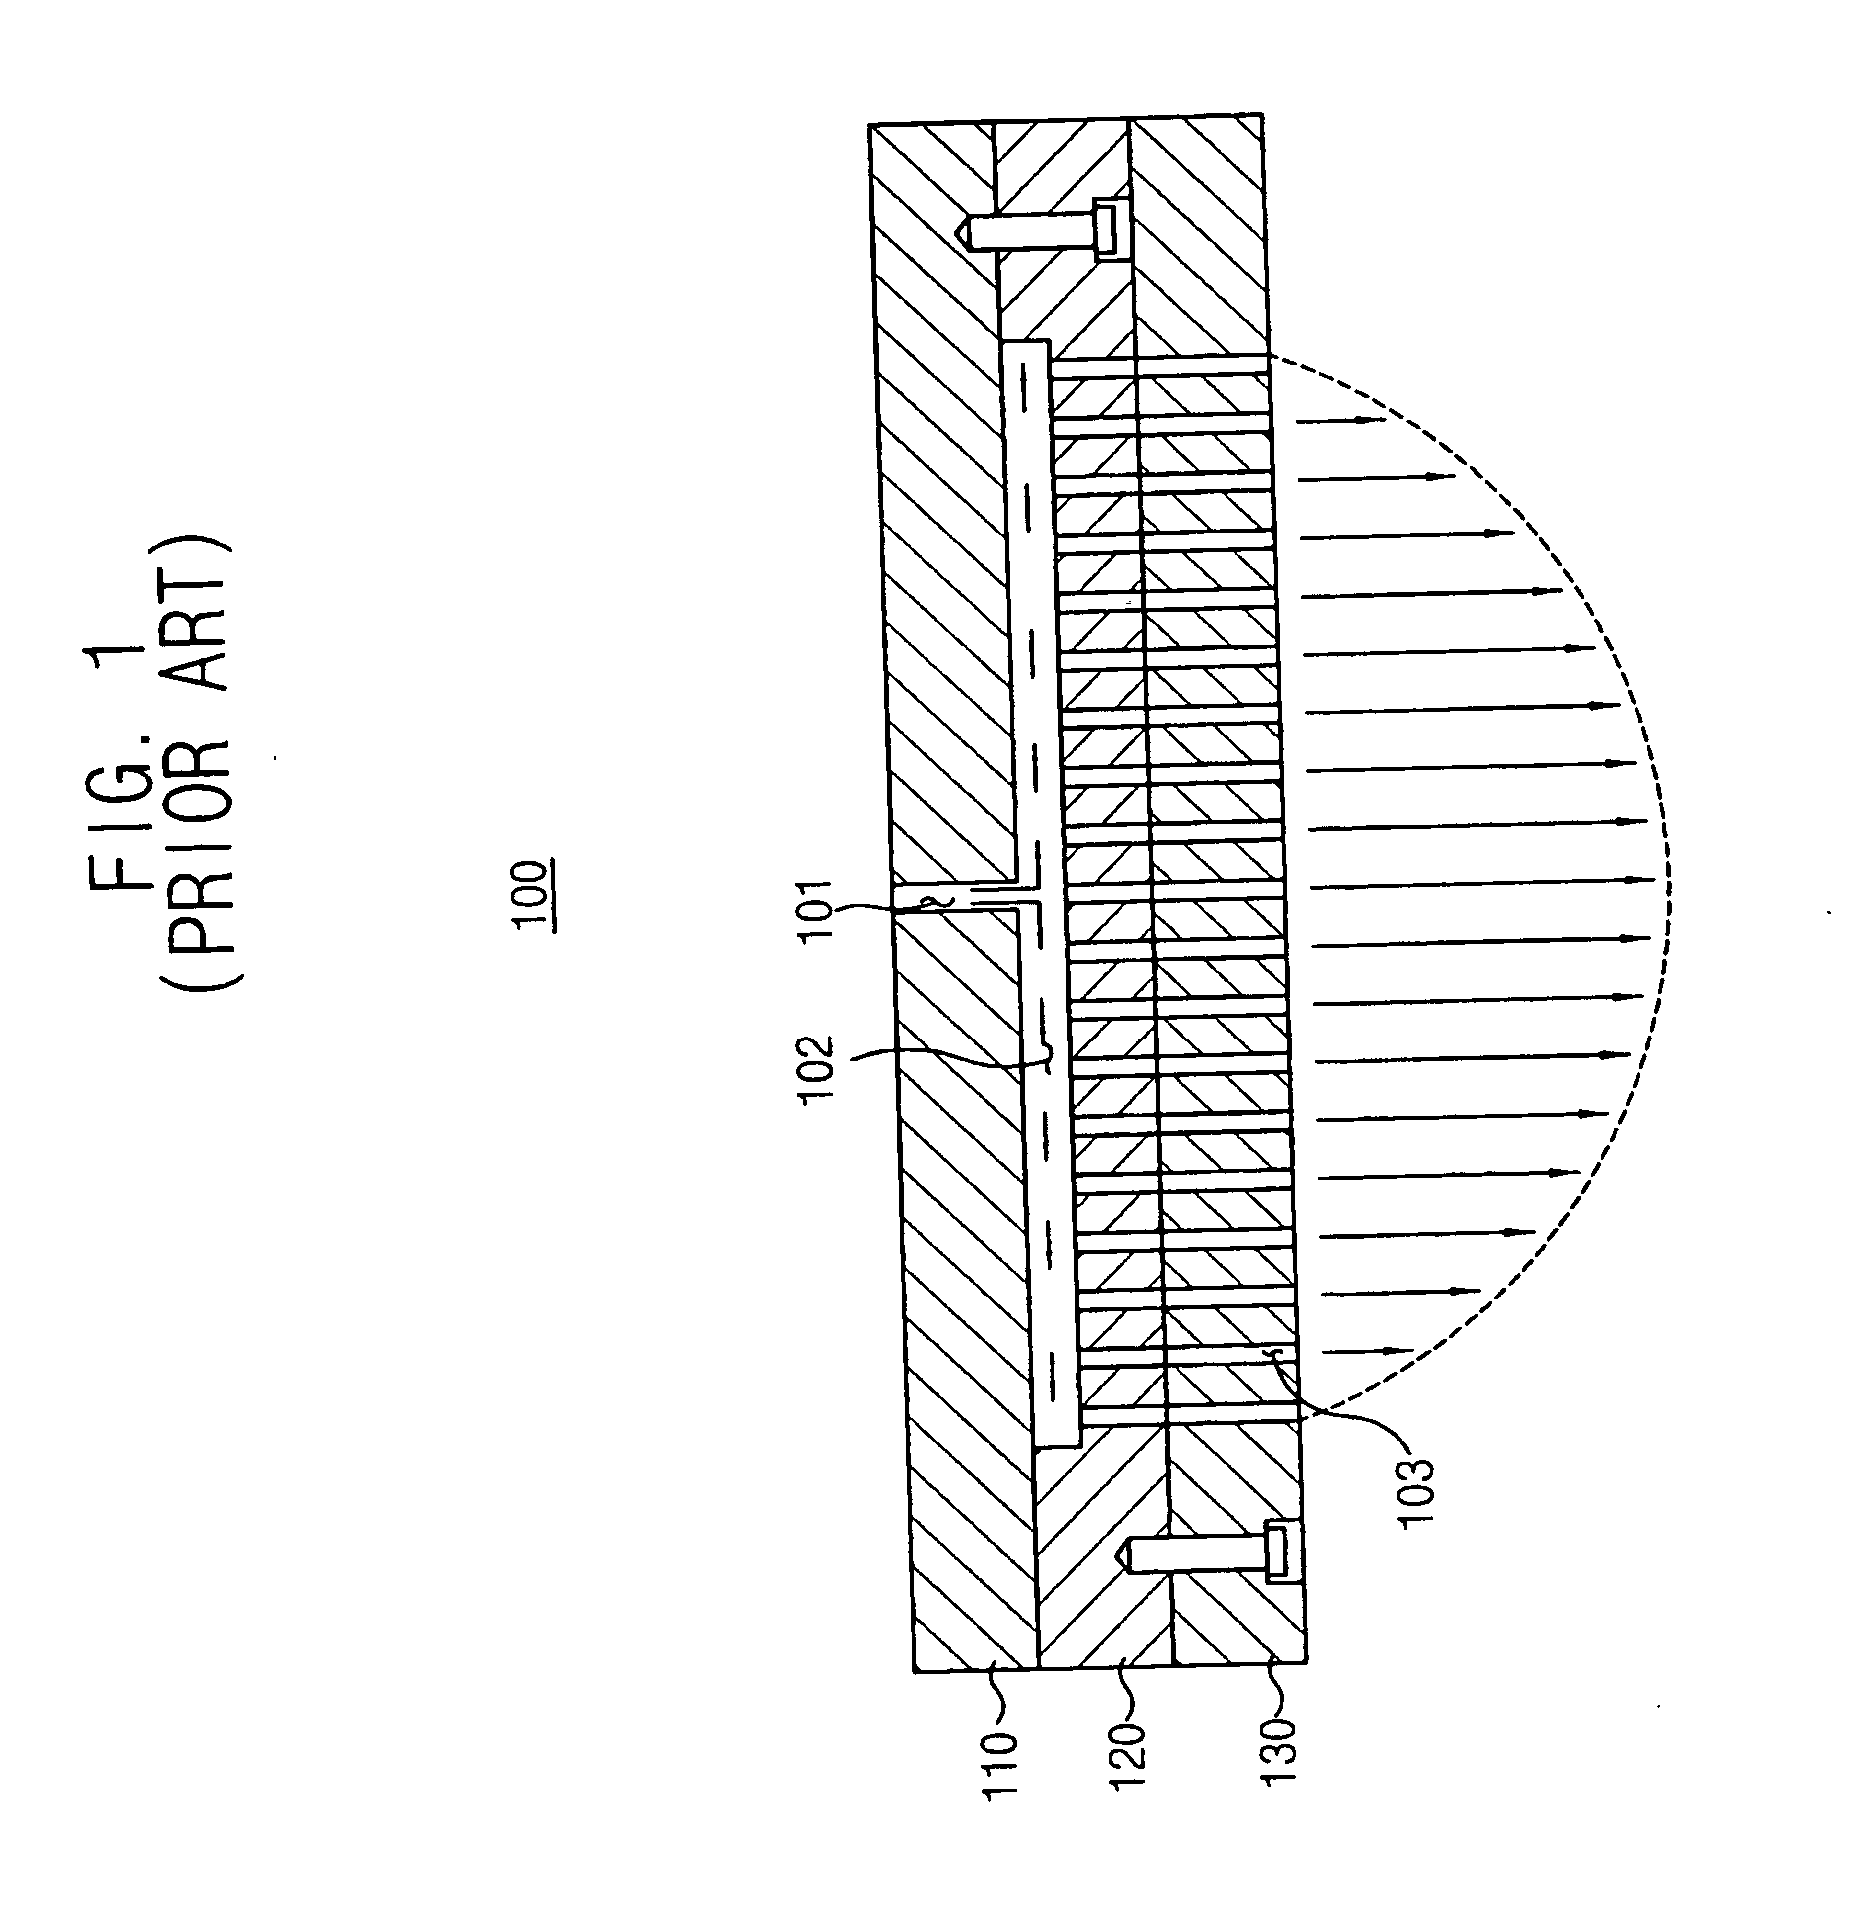 Showerheads for providing a gas to a substrate and apparatus and methods using the showerheads